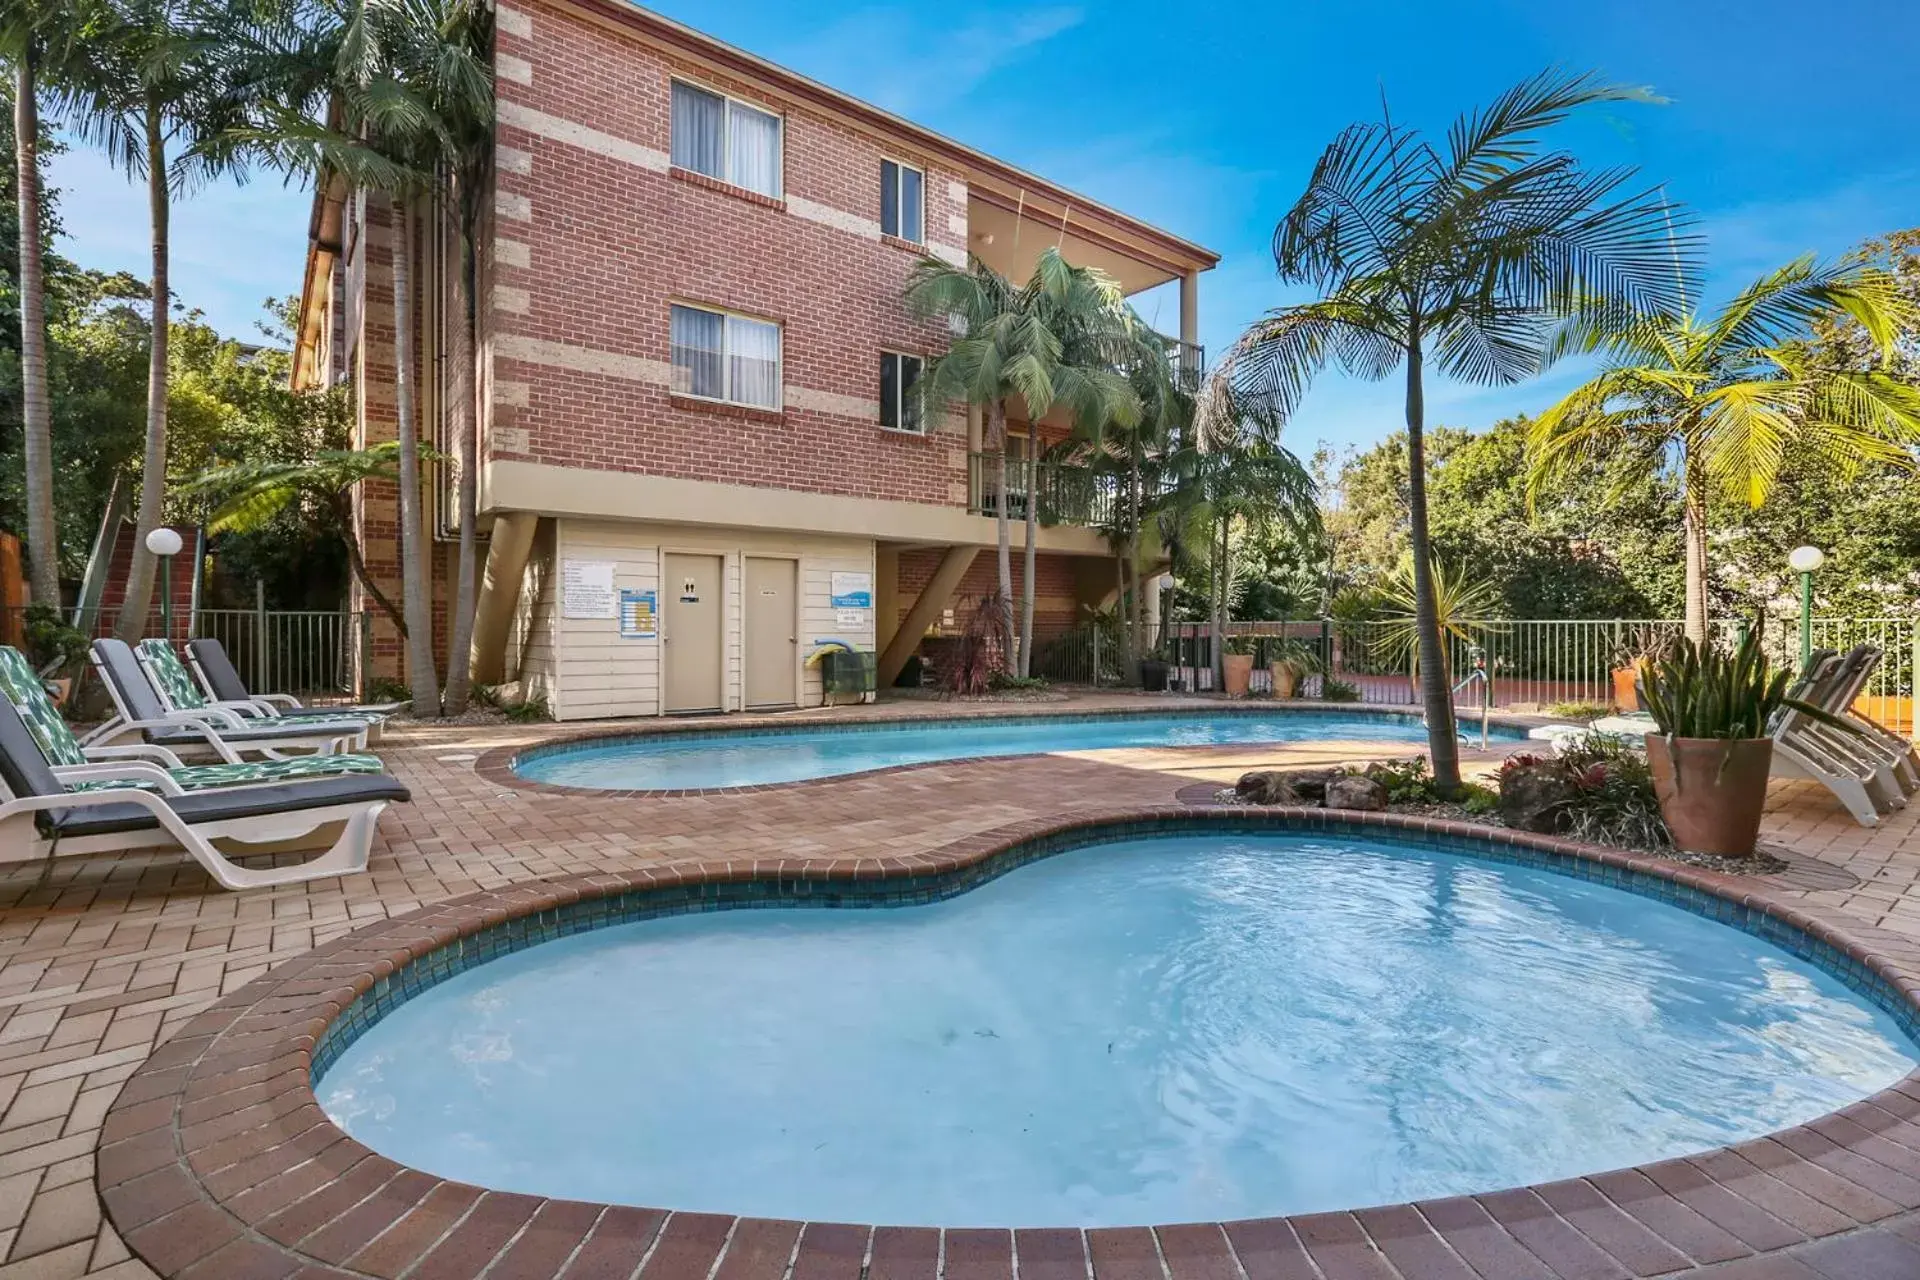 Swimming Pool in Terralong Terrace Apartments